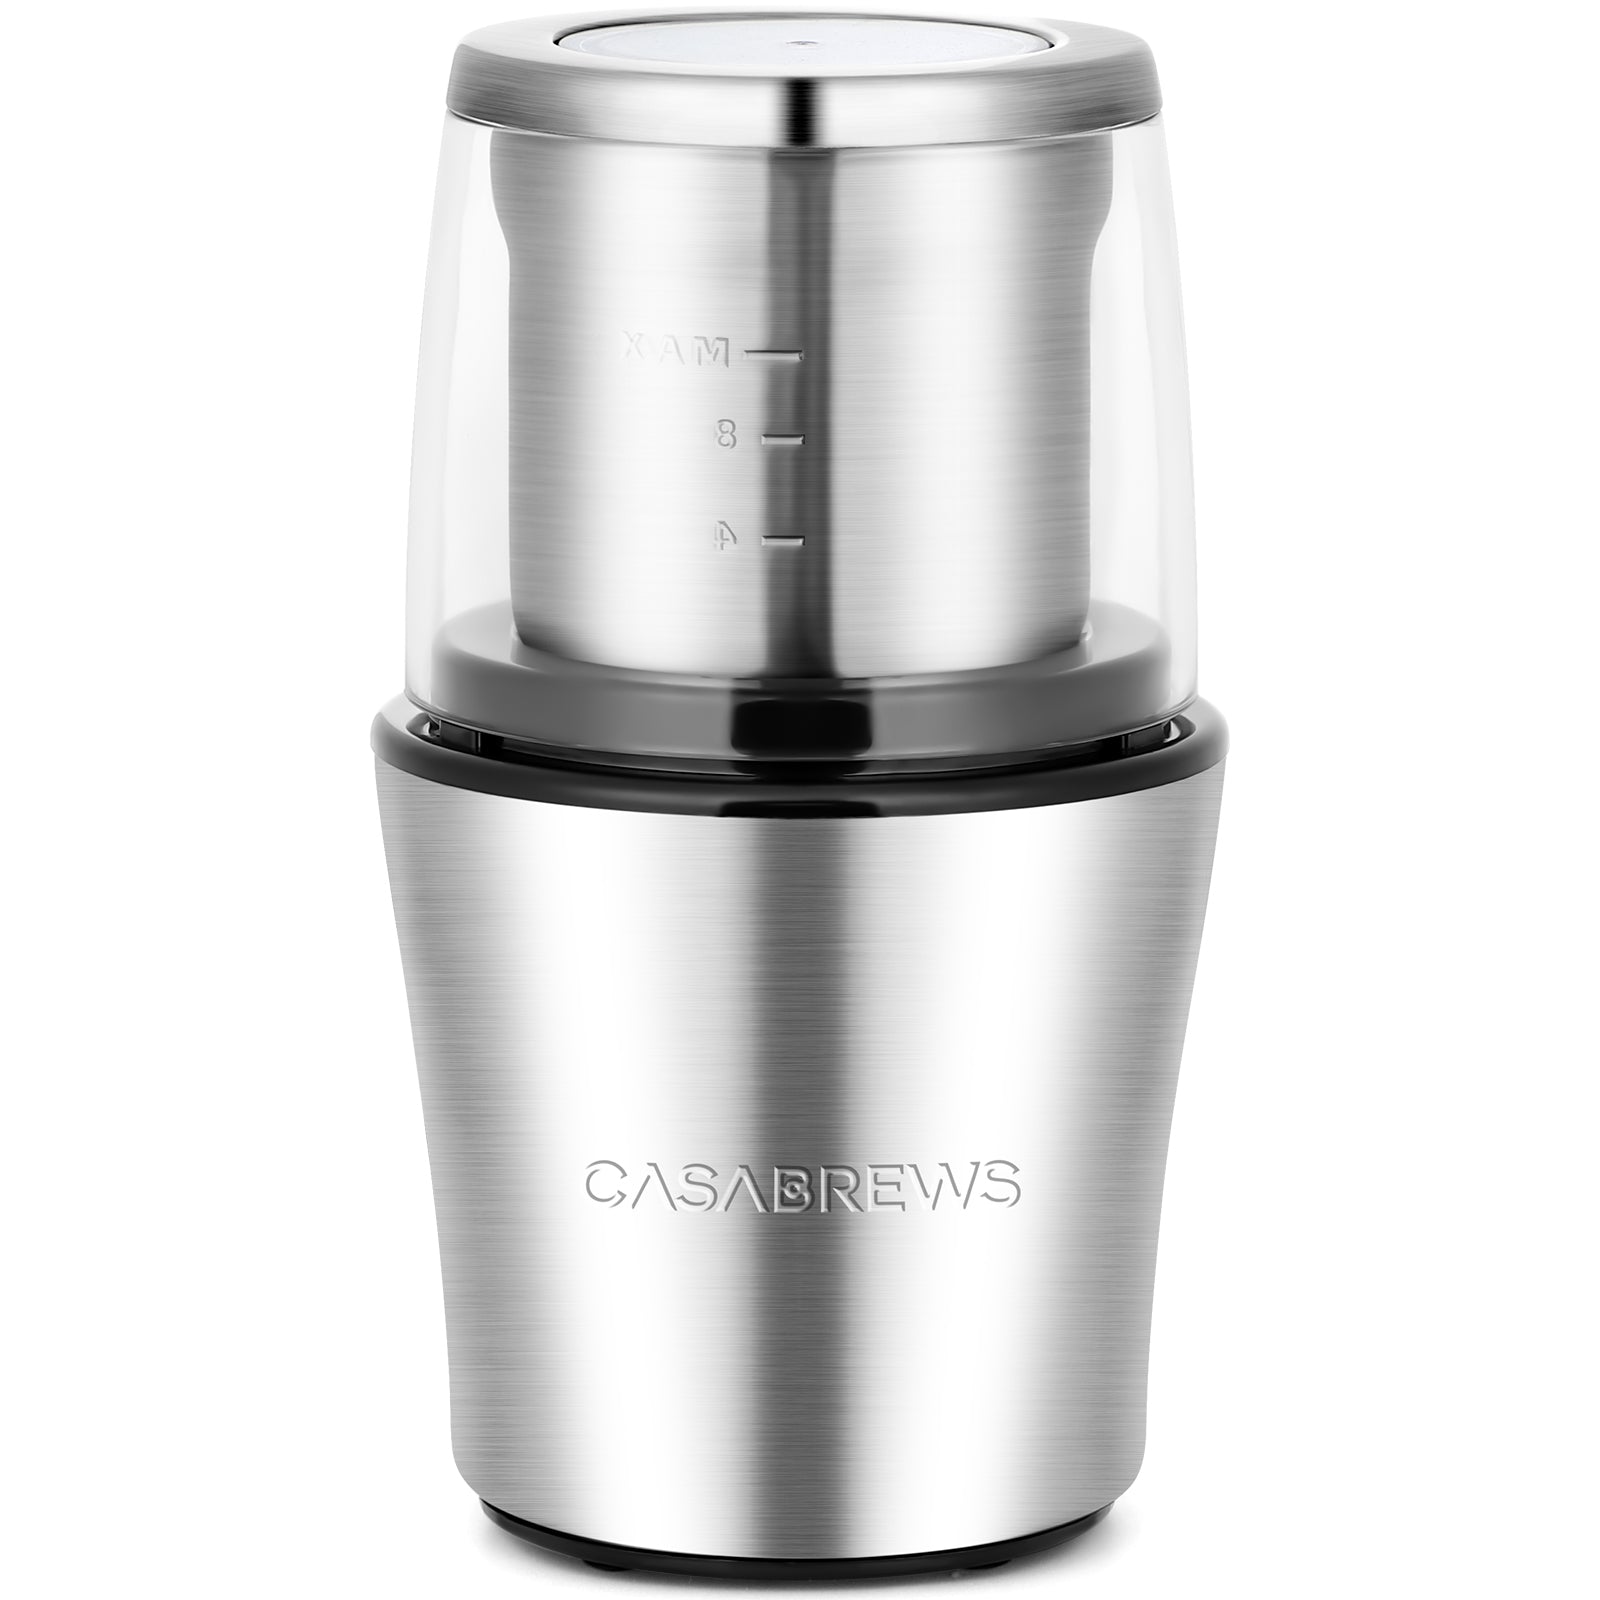 Electric Coffee Grinder and Spice Grinder with 2 Stainless Steel